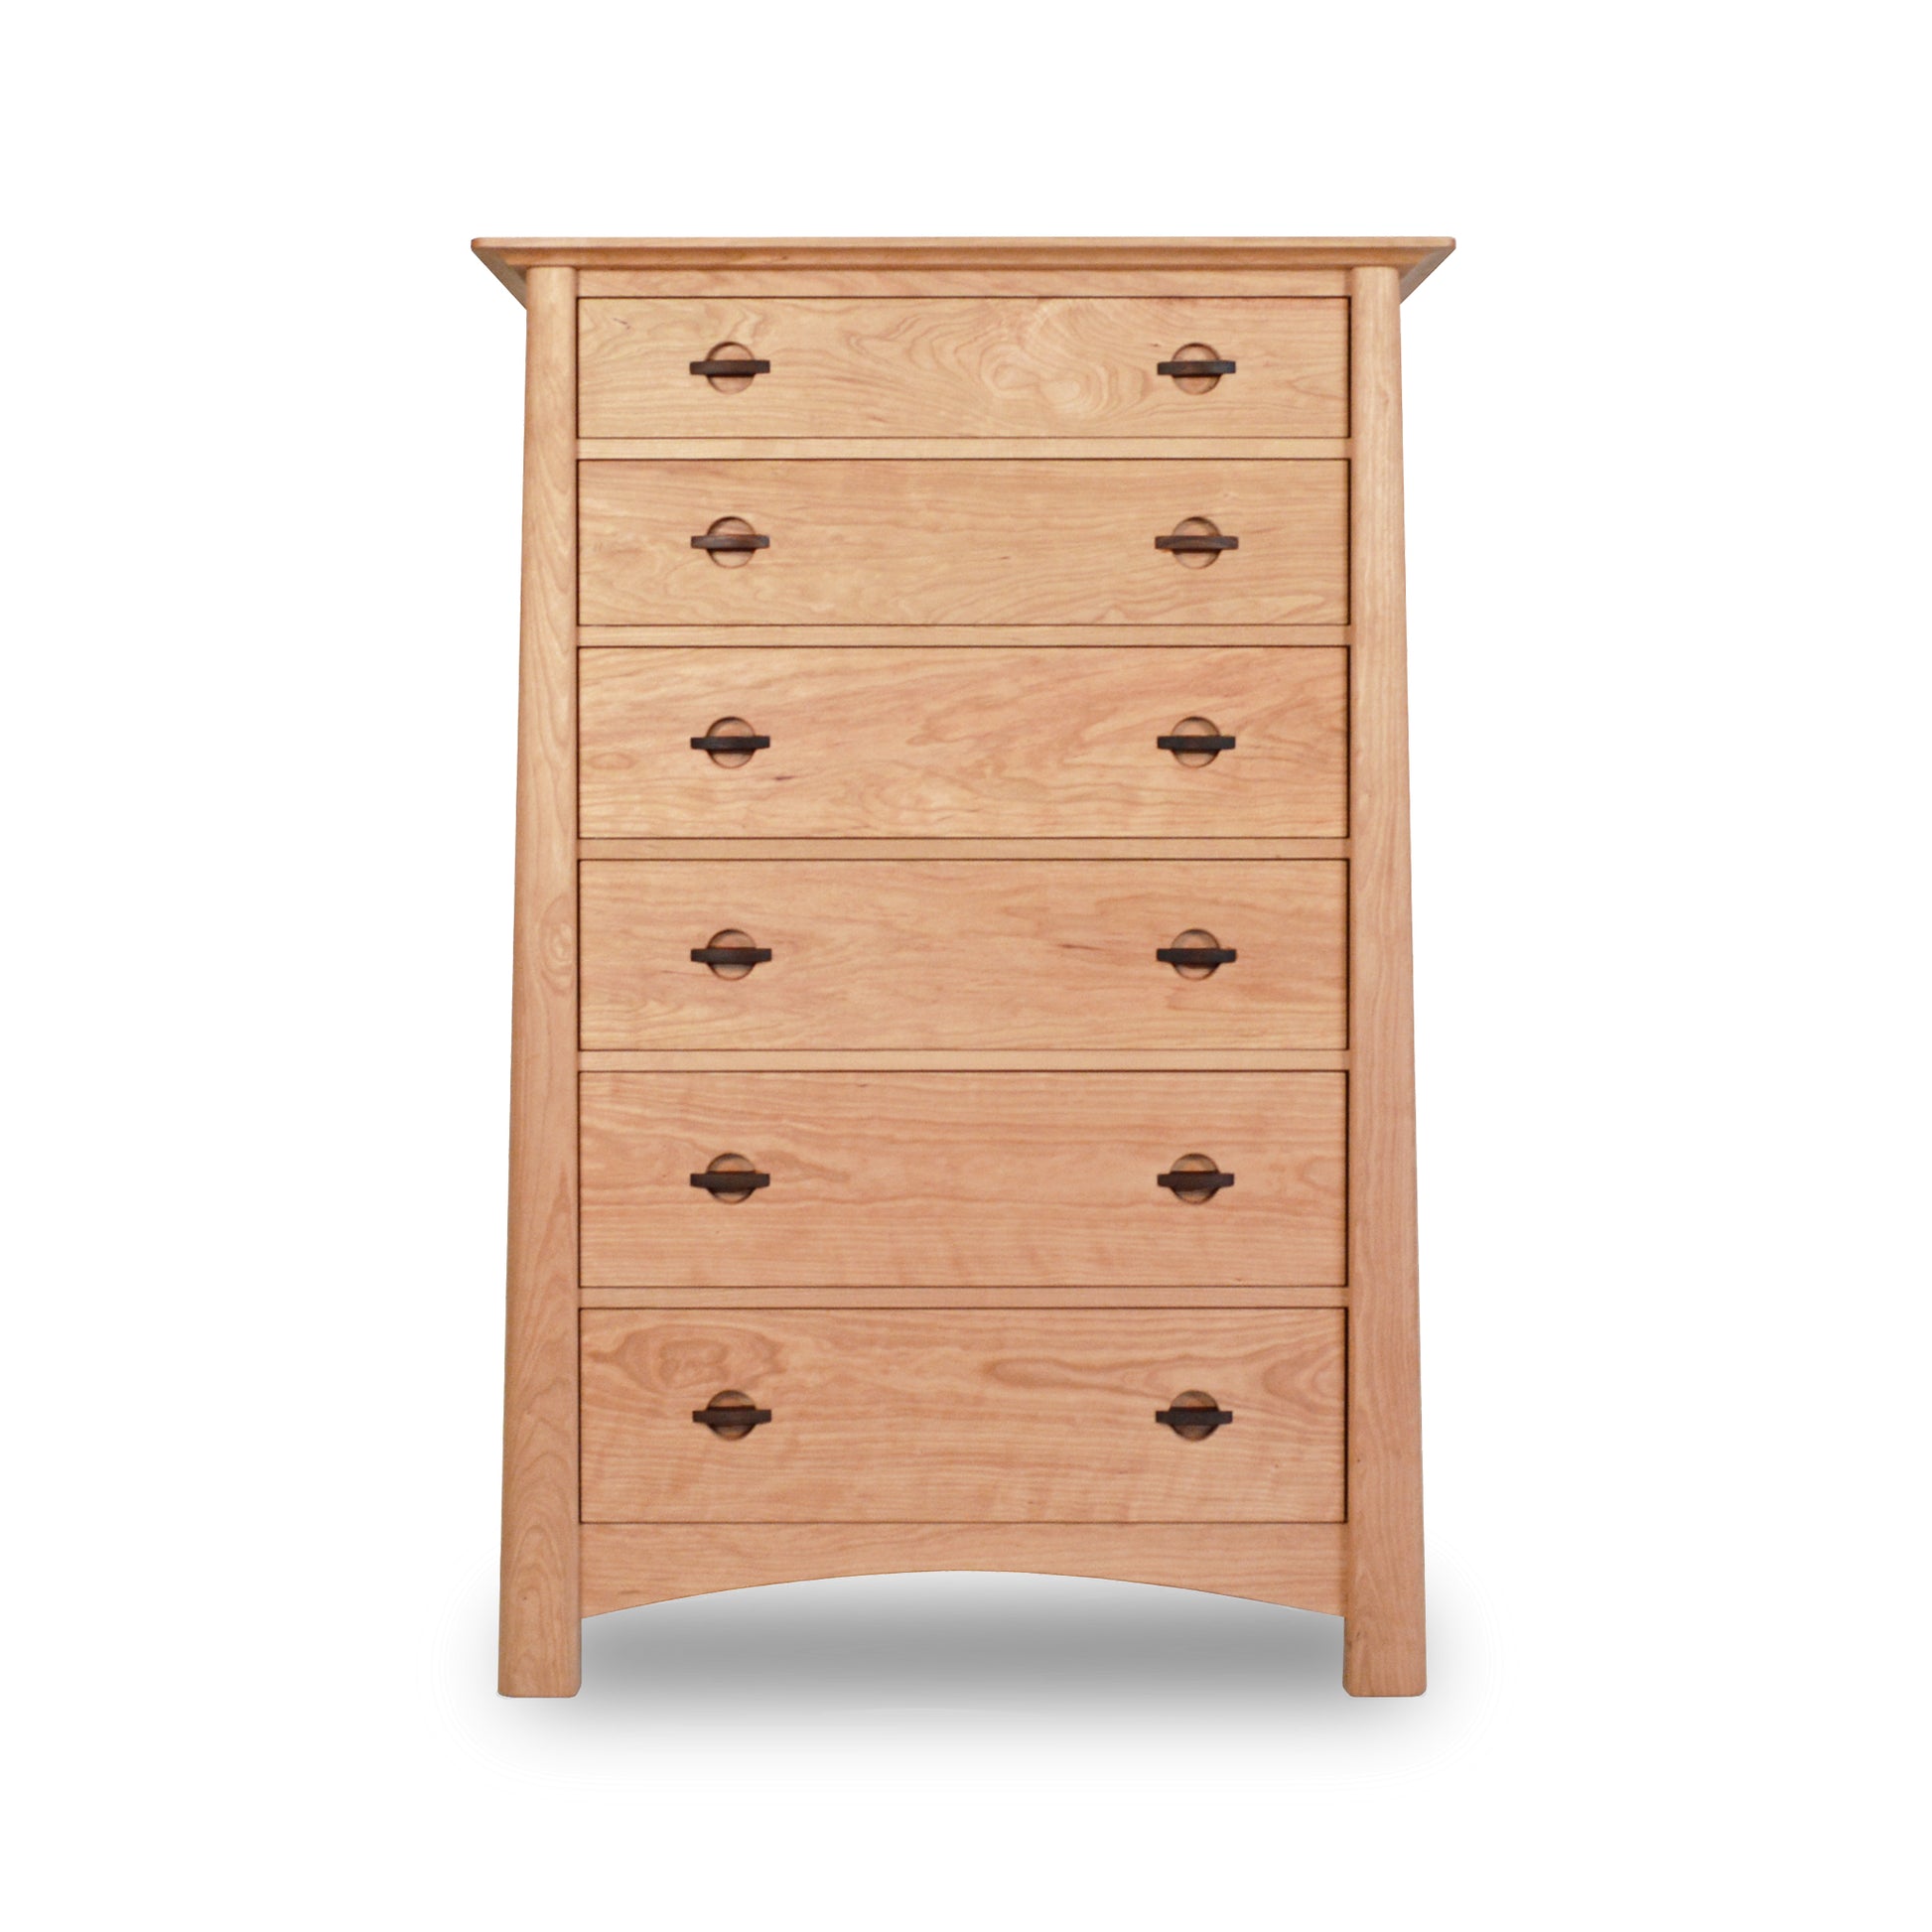 A Cherry Moon 6-Drawer Chest crafted from eco-friendly hardwoods with six drawers, each featuring two round handles, standing against a plain white background. The dresser has a light natural wood finish and a simple, classic design by Maple Corner Woodworks.